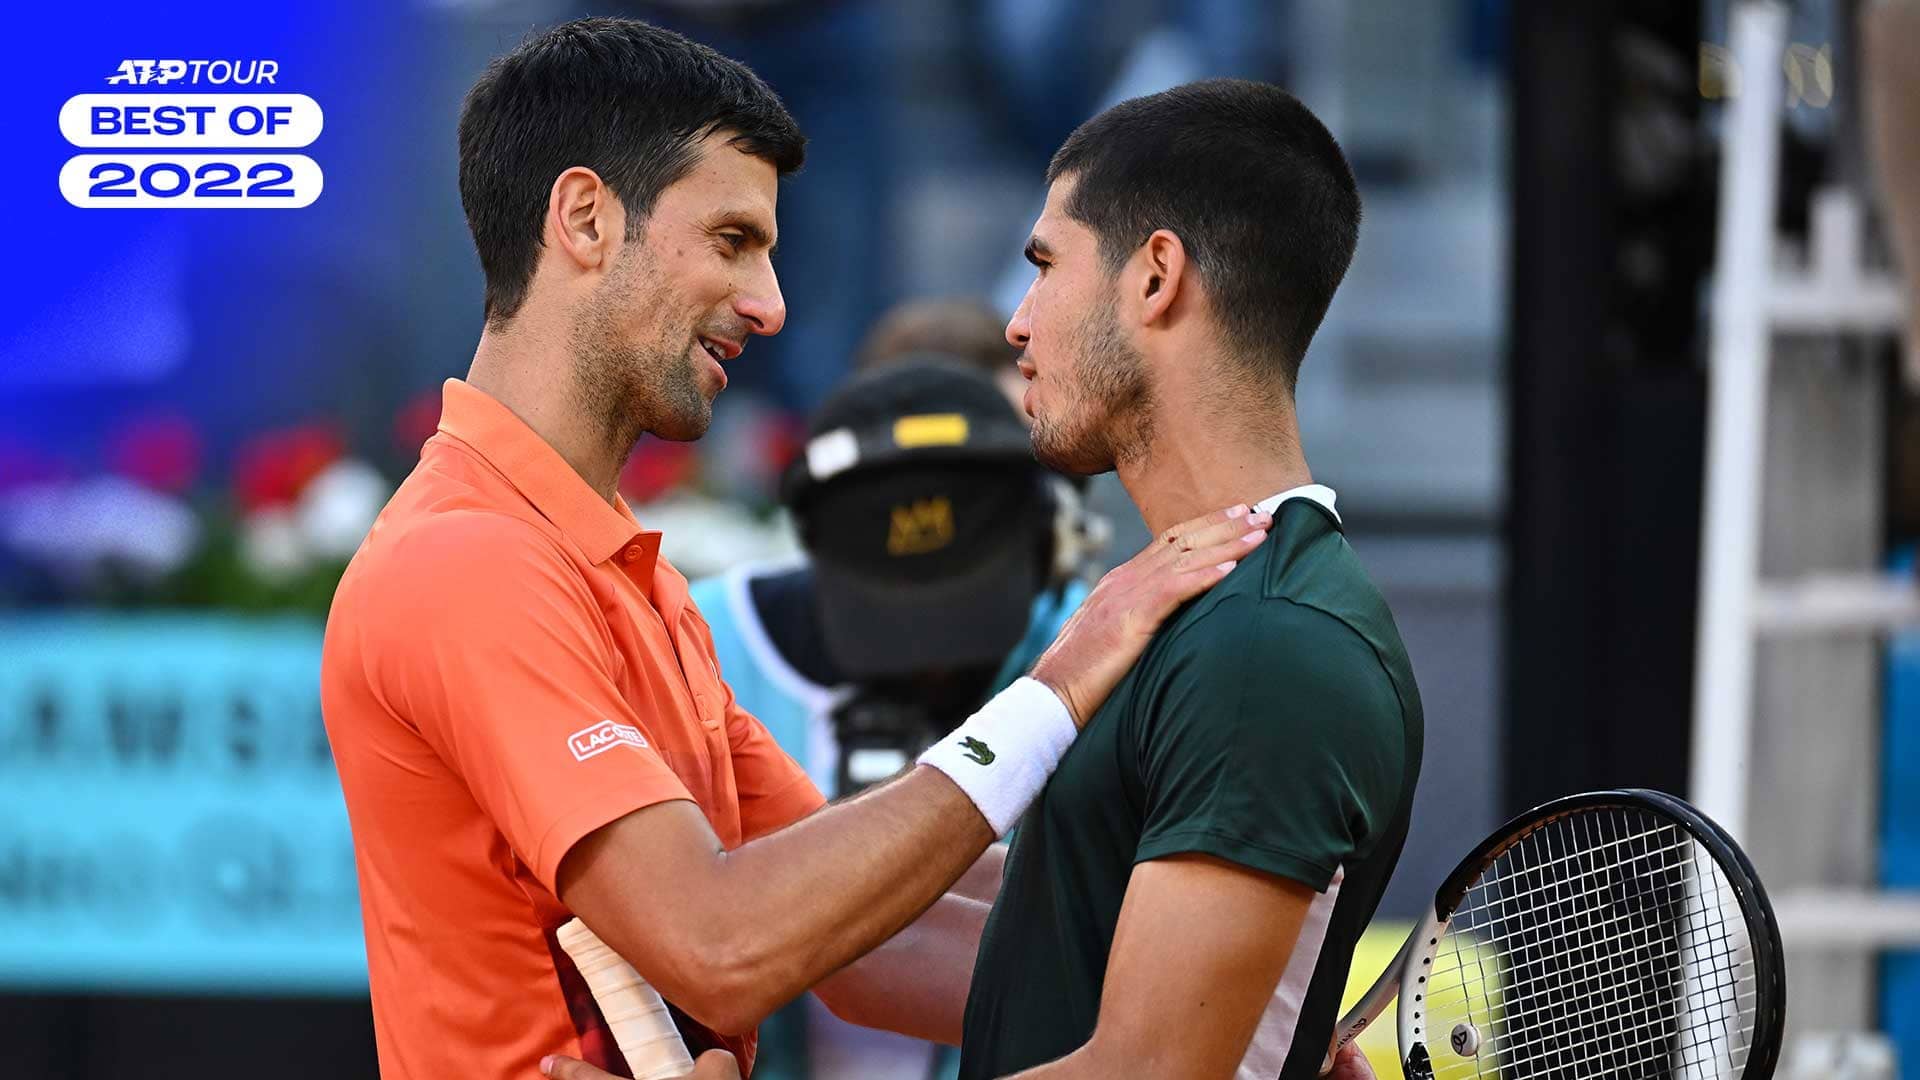 Novak Djokovic and Carlos Alcaraz met for the first time in Madrid earlier this season.